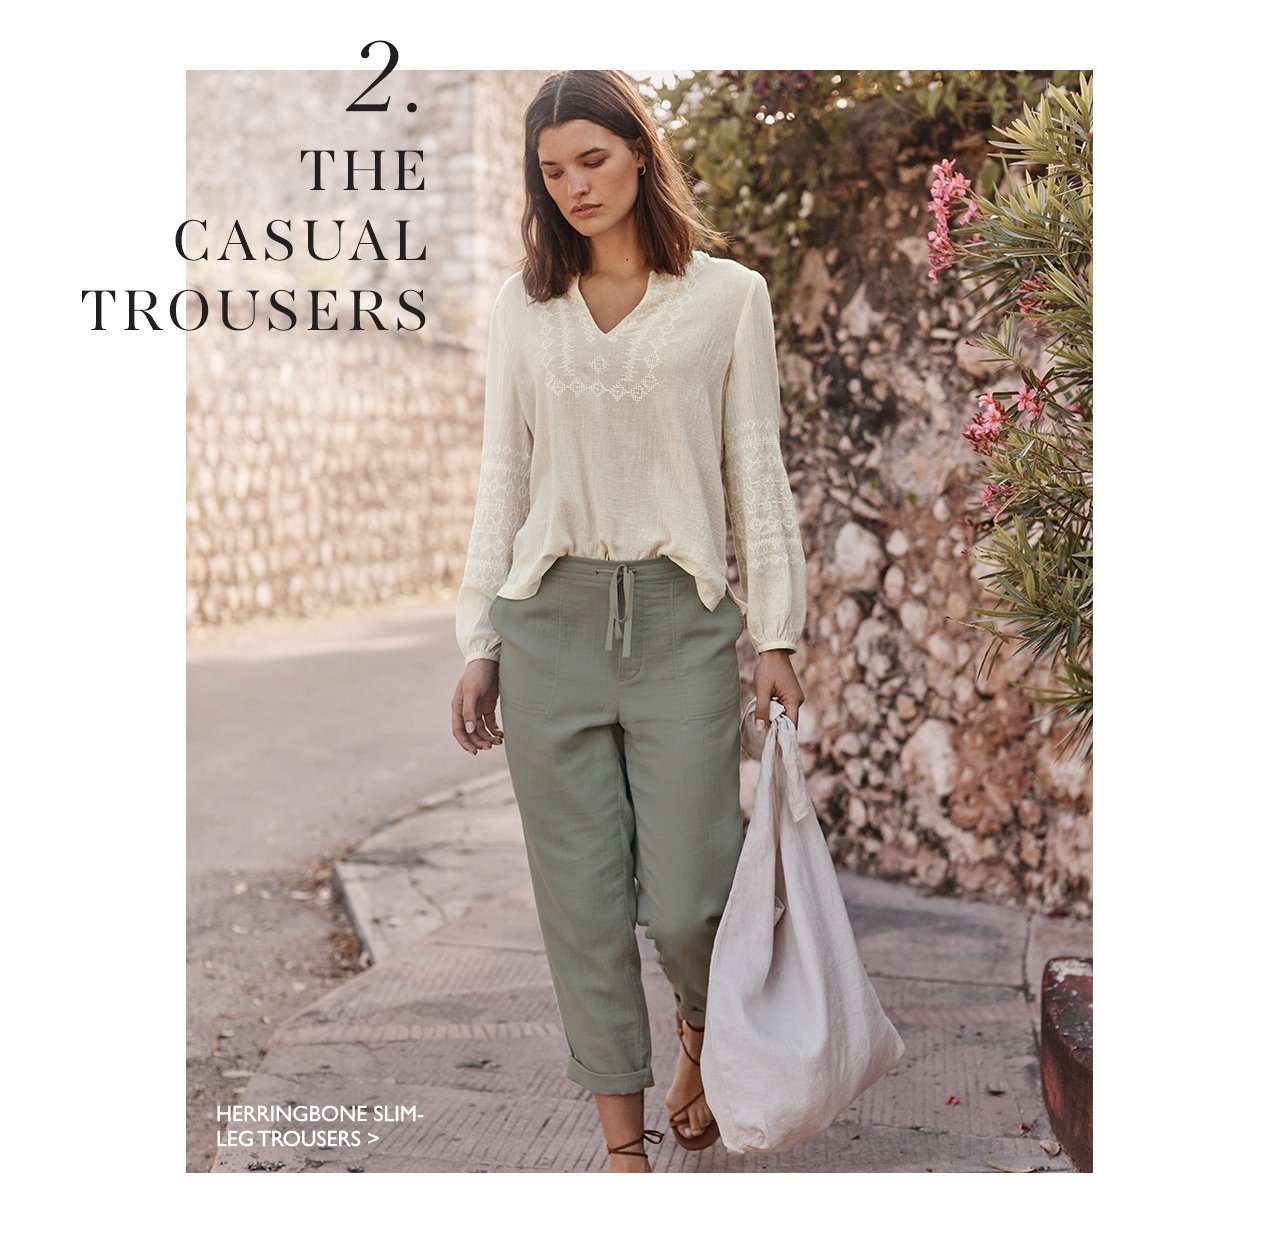 2. THE CASUAL TROUSERS